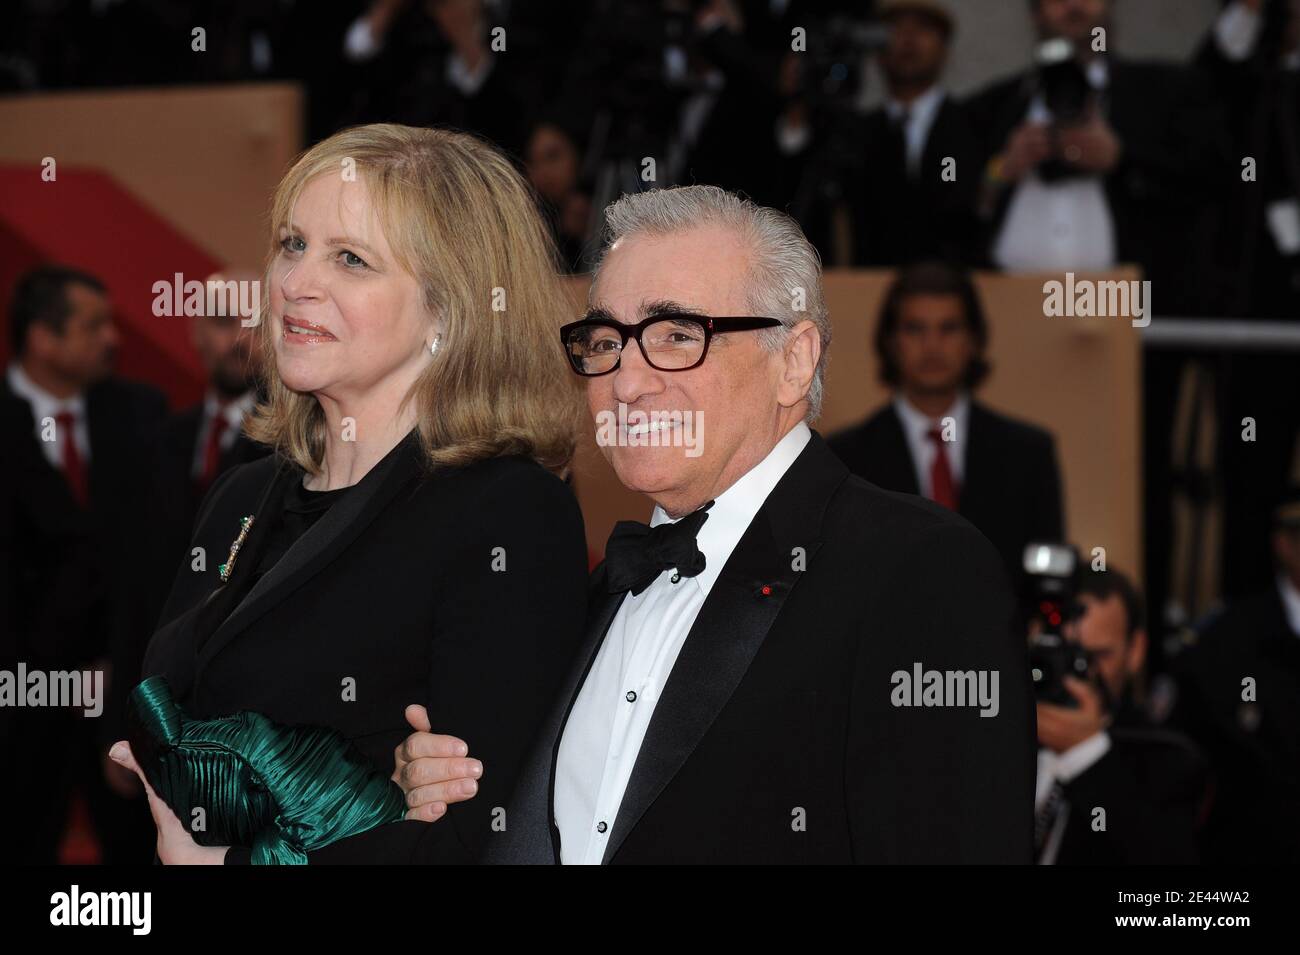 Helen Morris ans Martin Scorsese arriving to the screening of 'Bright Star' during the 62nd Cannes Film Festival at the Palais des Festivals in Cannes, France on May 15, 2009. Photo by Nebinger-Orban/ABACAPRESS.COM Local Caption 187682 040 Local Caption 187682 040 Stock Photo